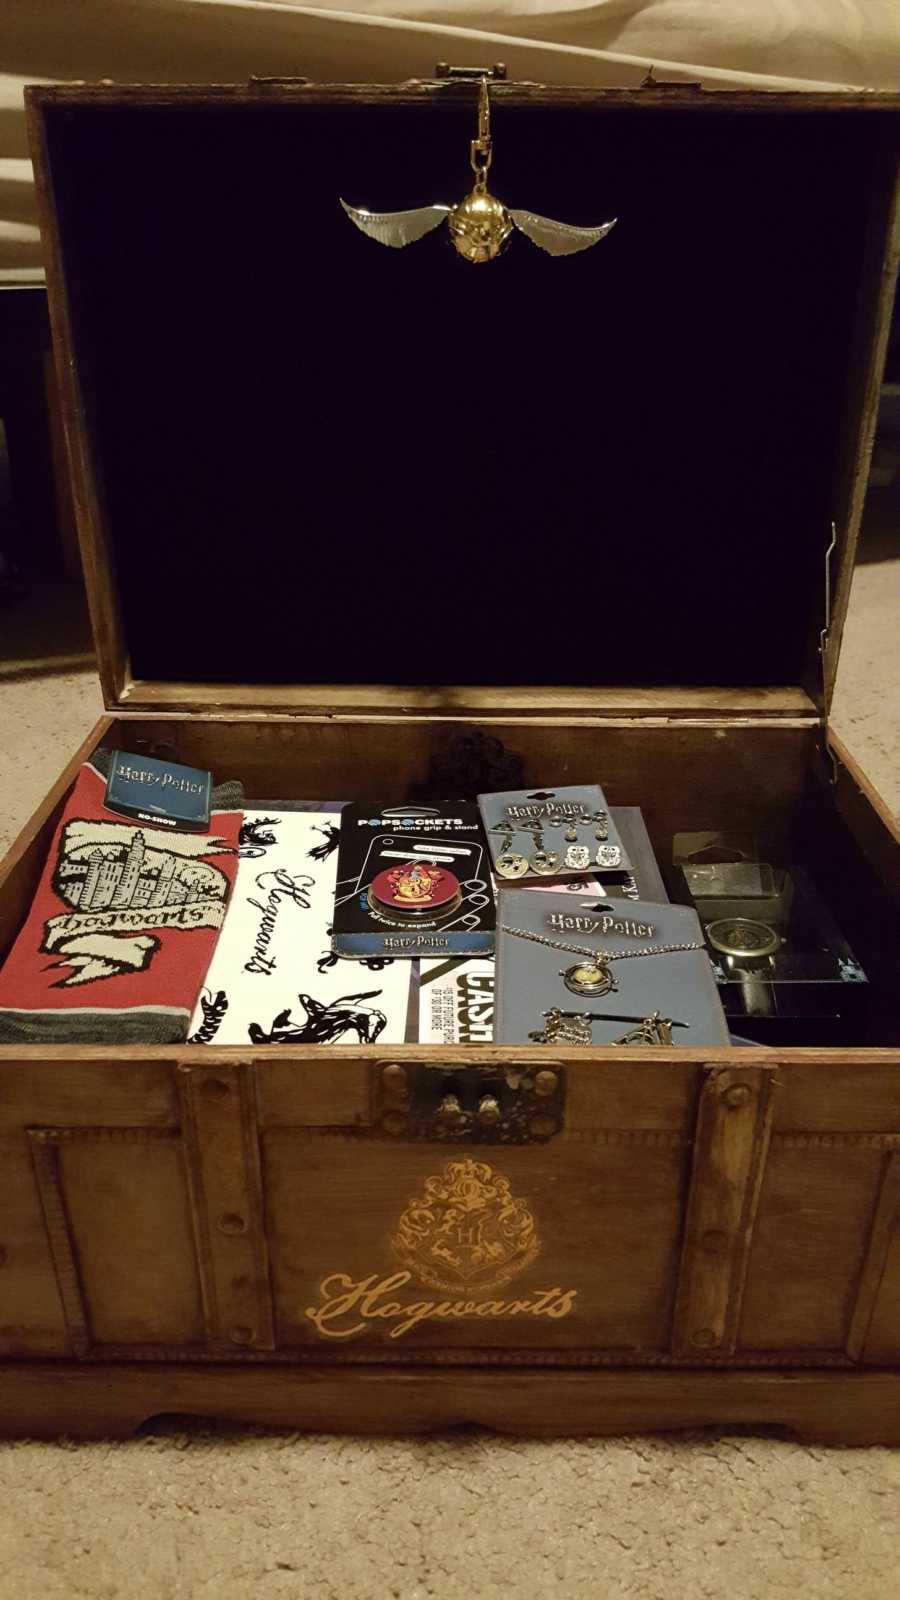 Trunk opened with golden snitch dangling from top of trunk with Harry Potter goodies inside 